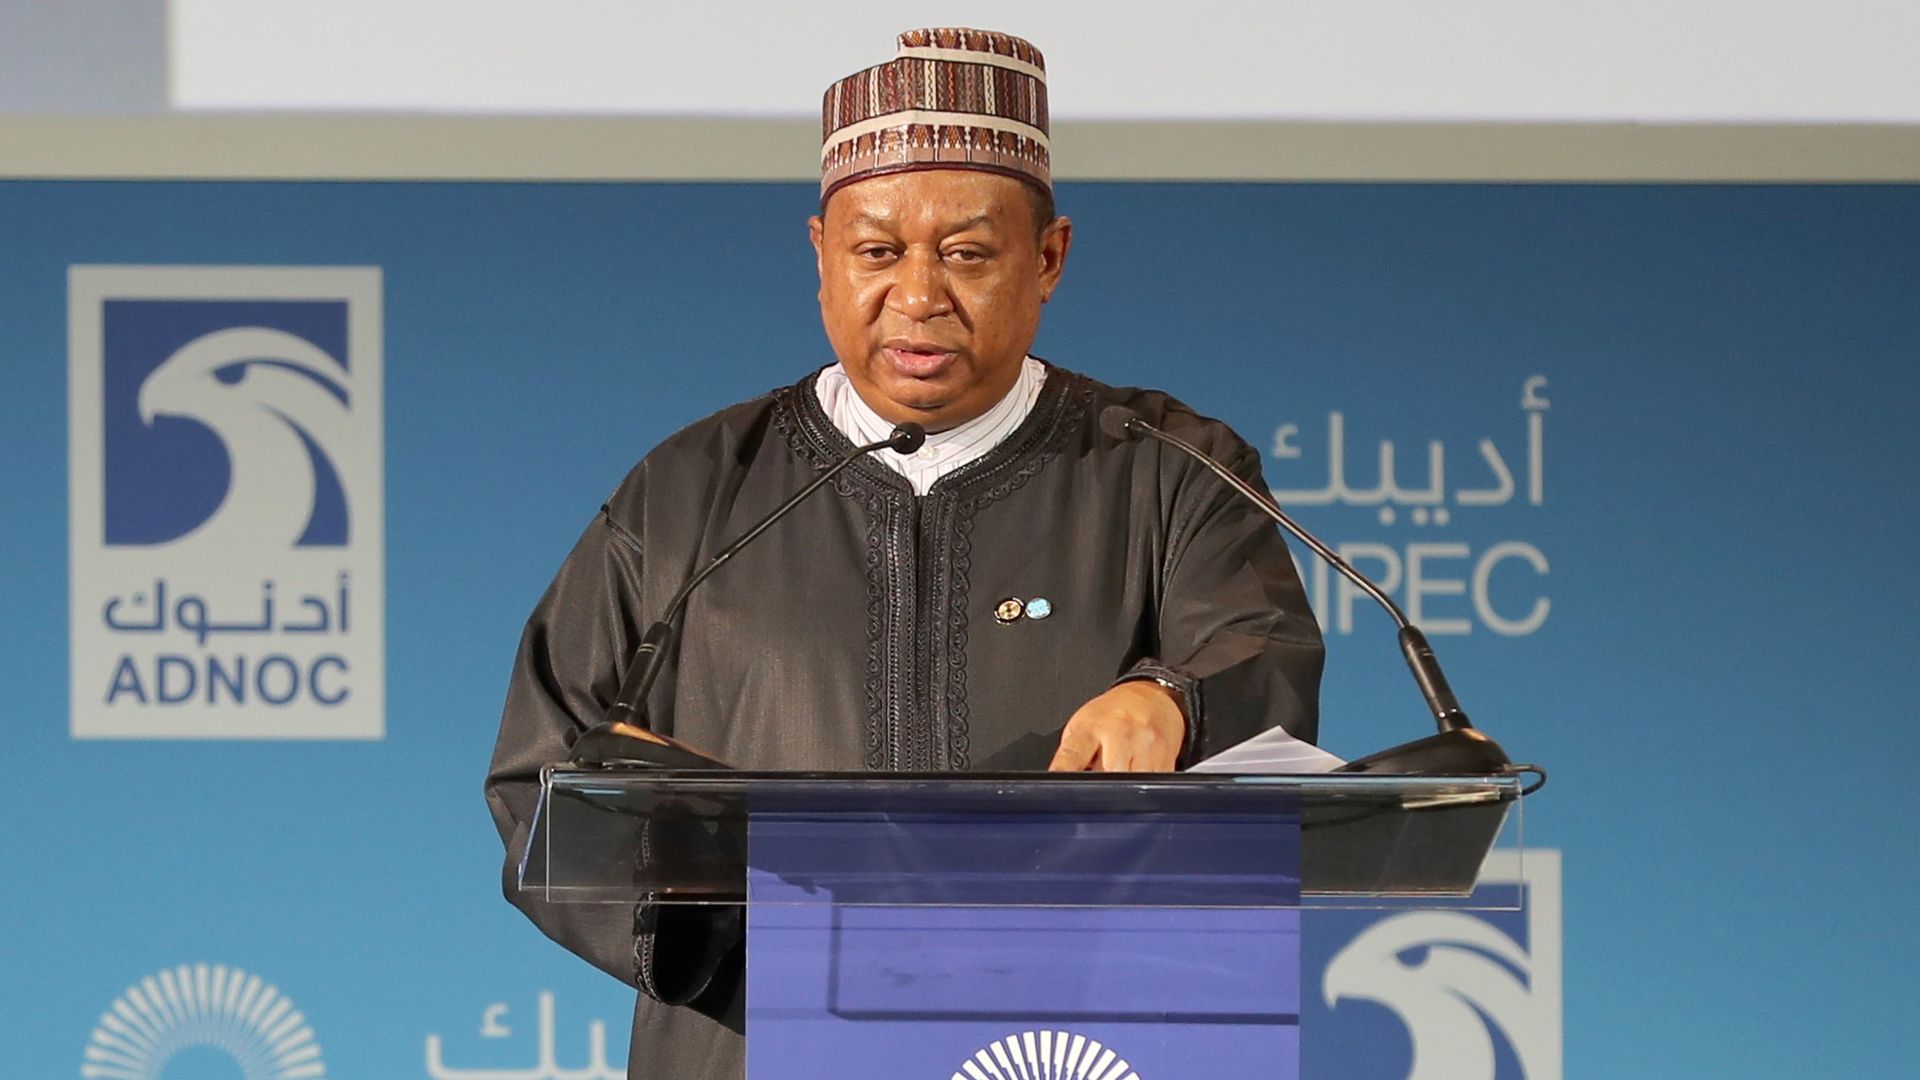 Mohammed Barkindo speaking from a lectern